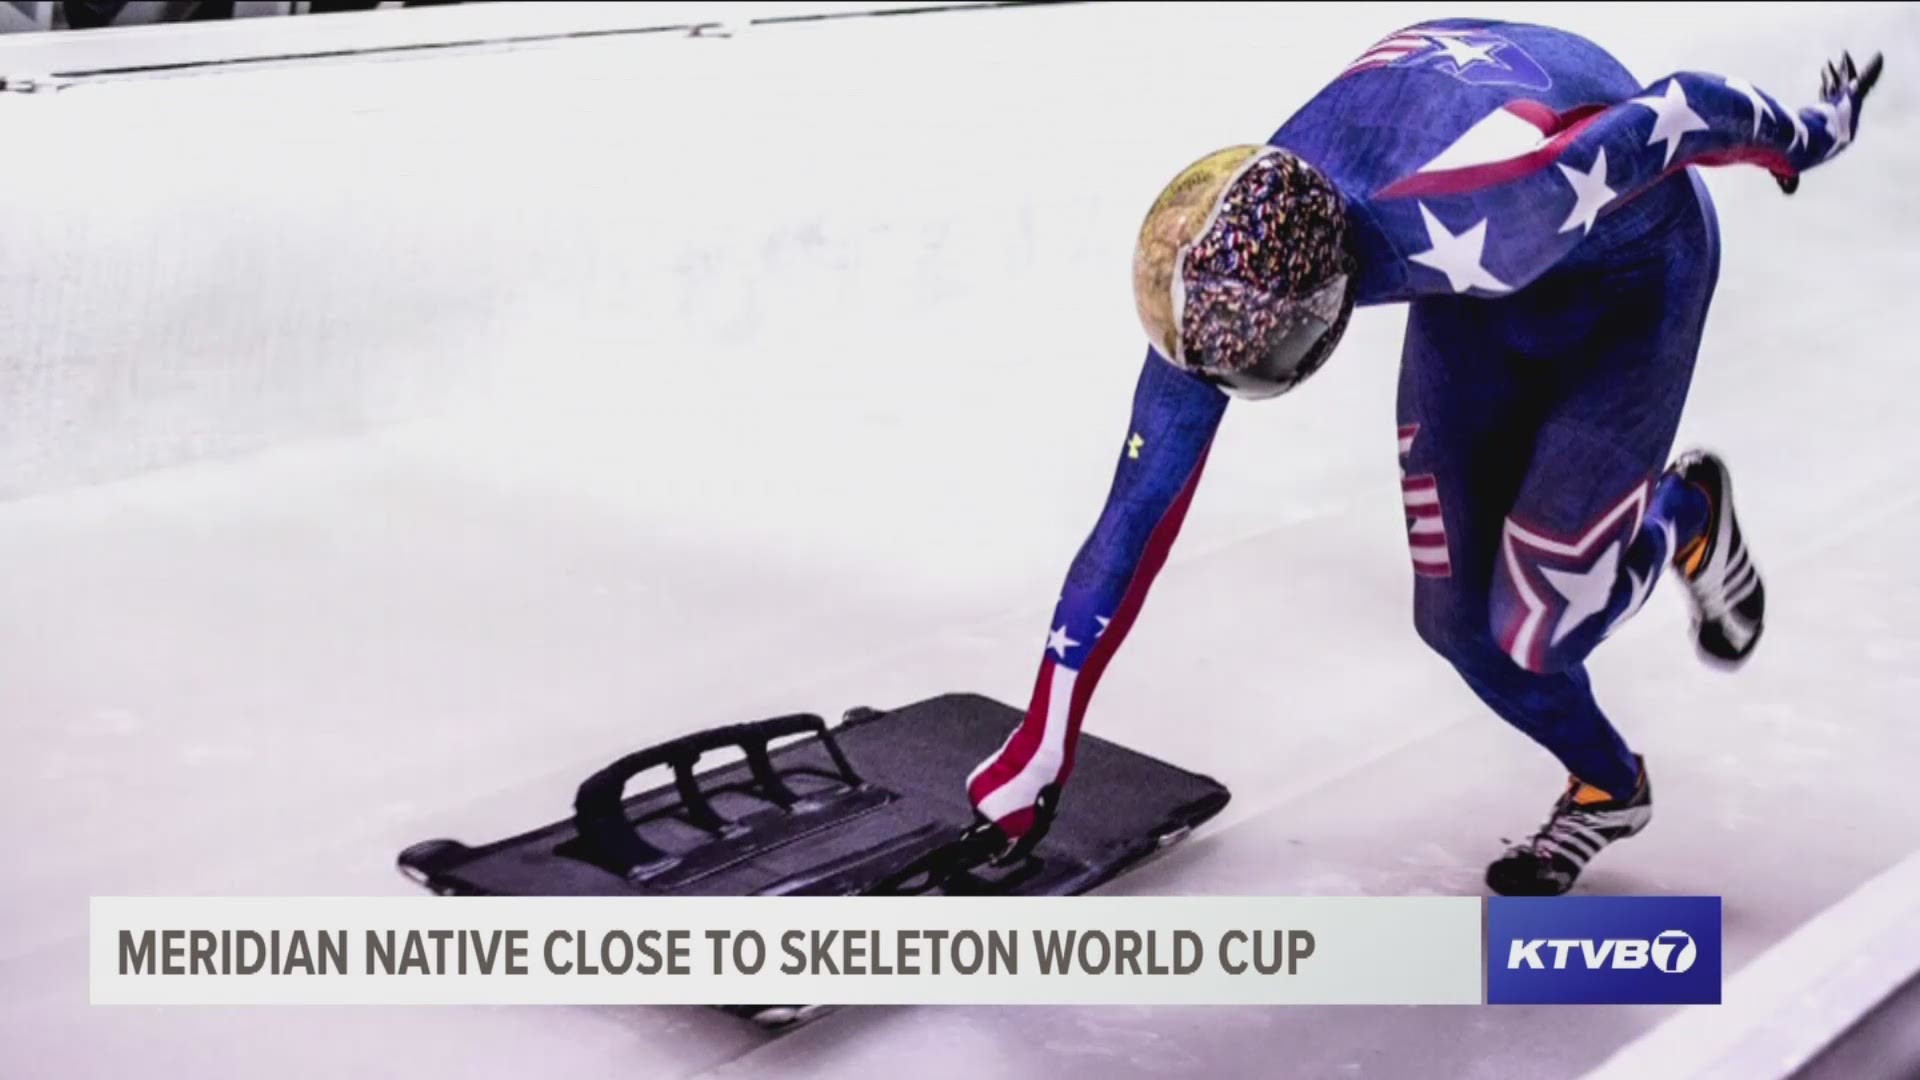 Meridian native aims for Skeleton World Cup team